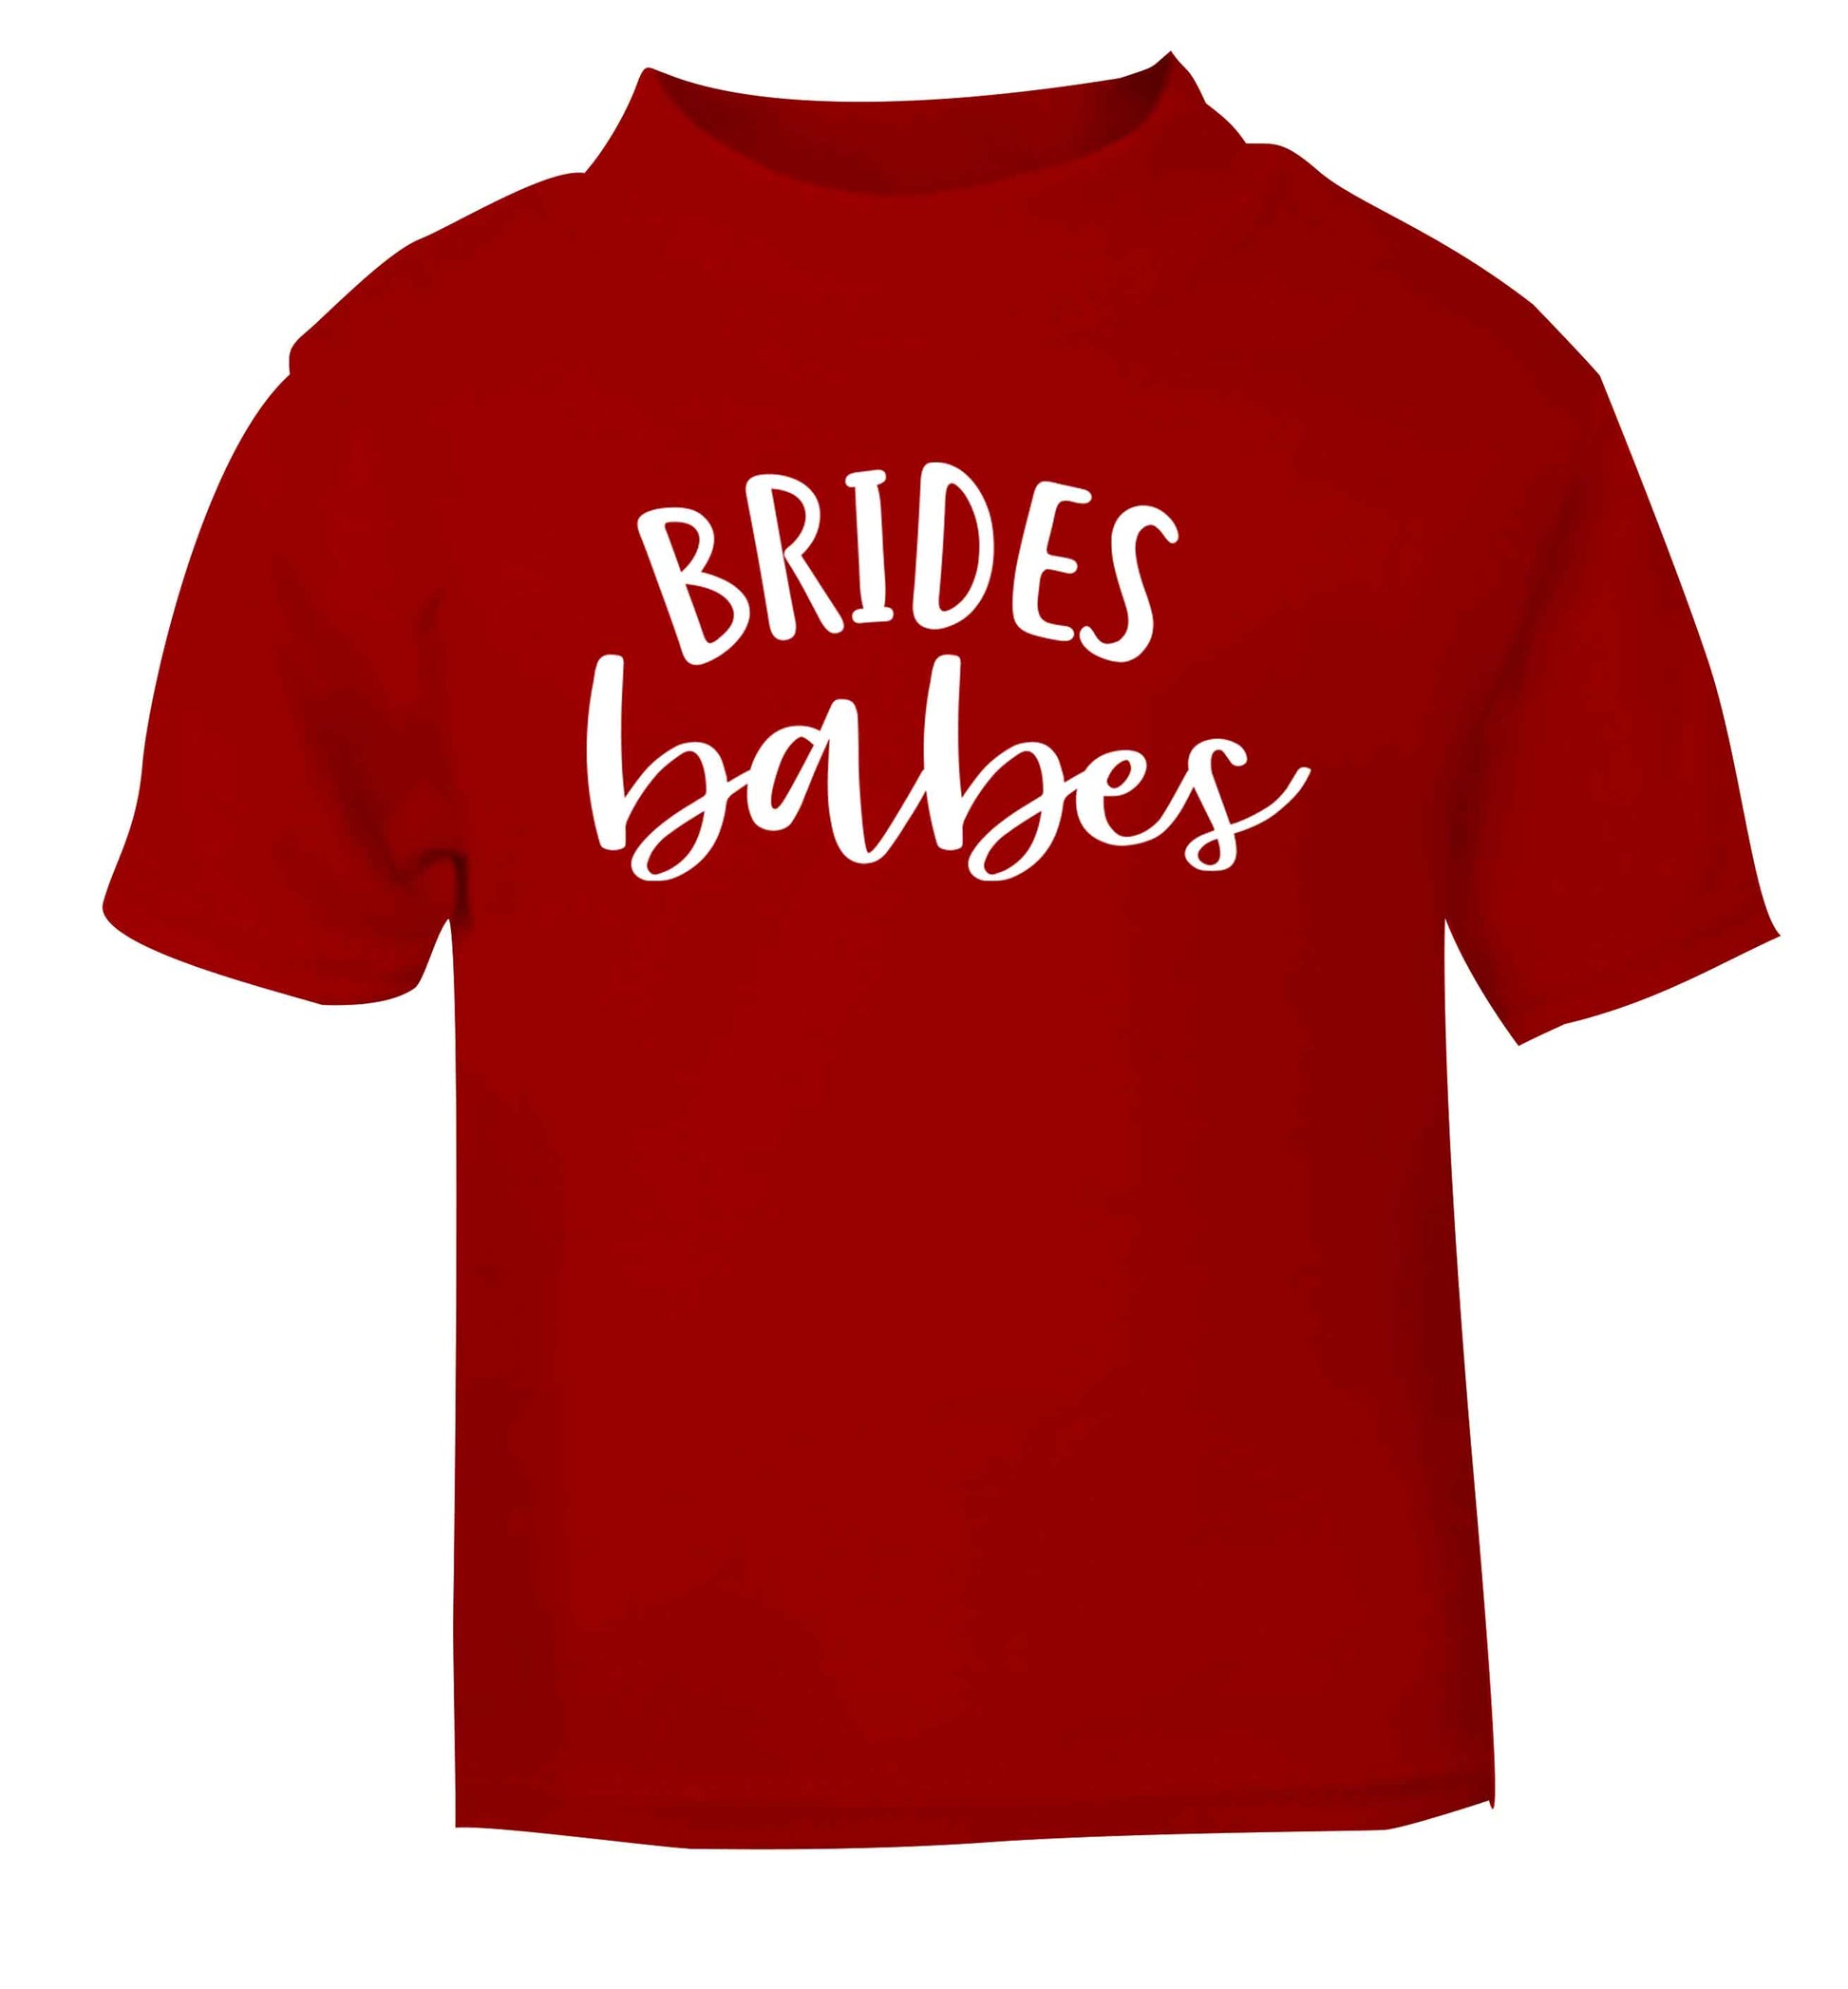 Brides Babes red Baby Toddler Tshirt 2 Years